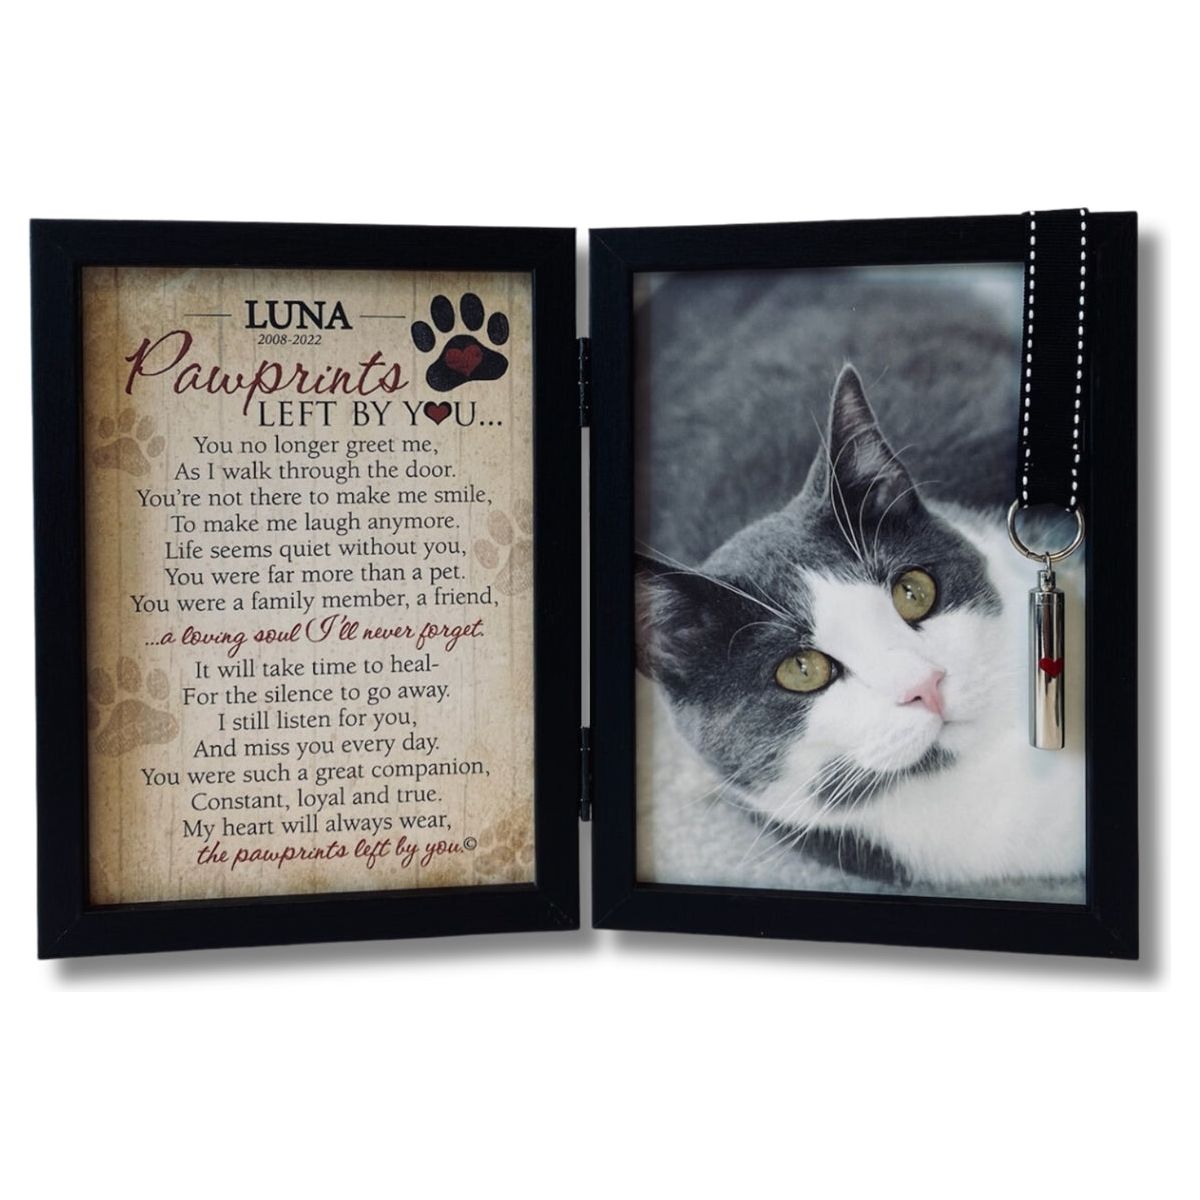 Personalized Pawprints Cat Loss Memorial Frame: Pawprints Left by You with Vial